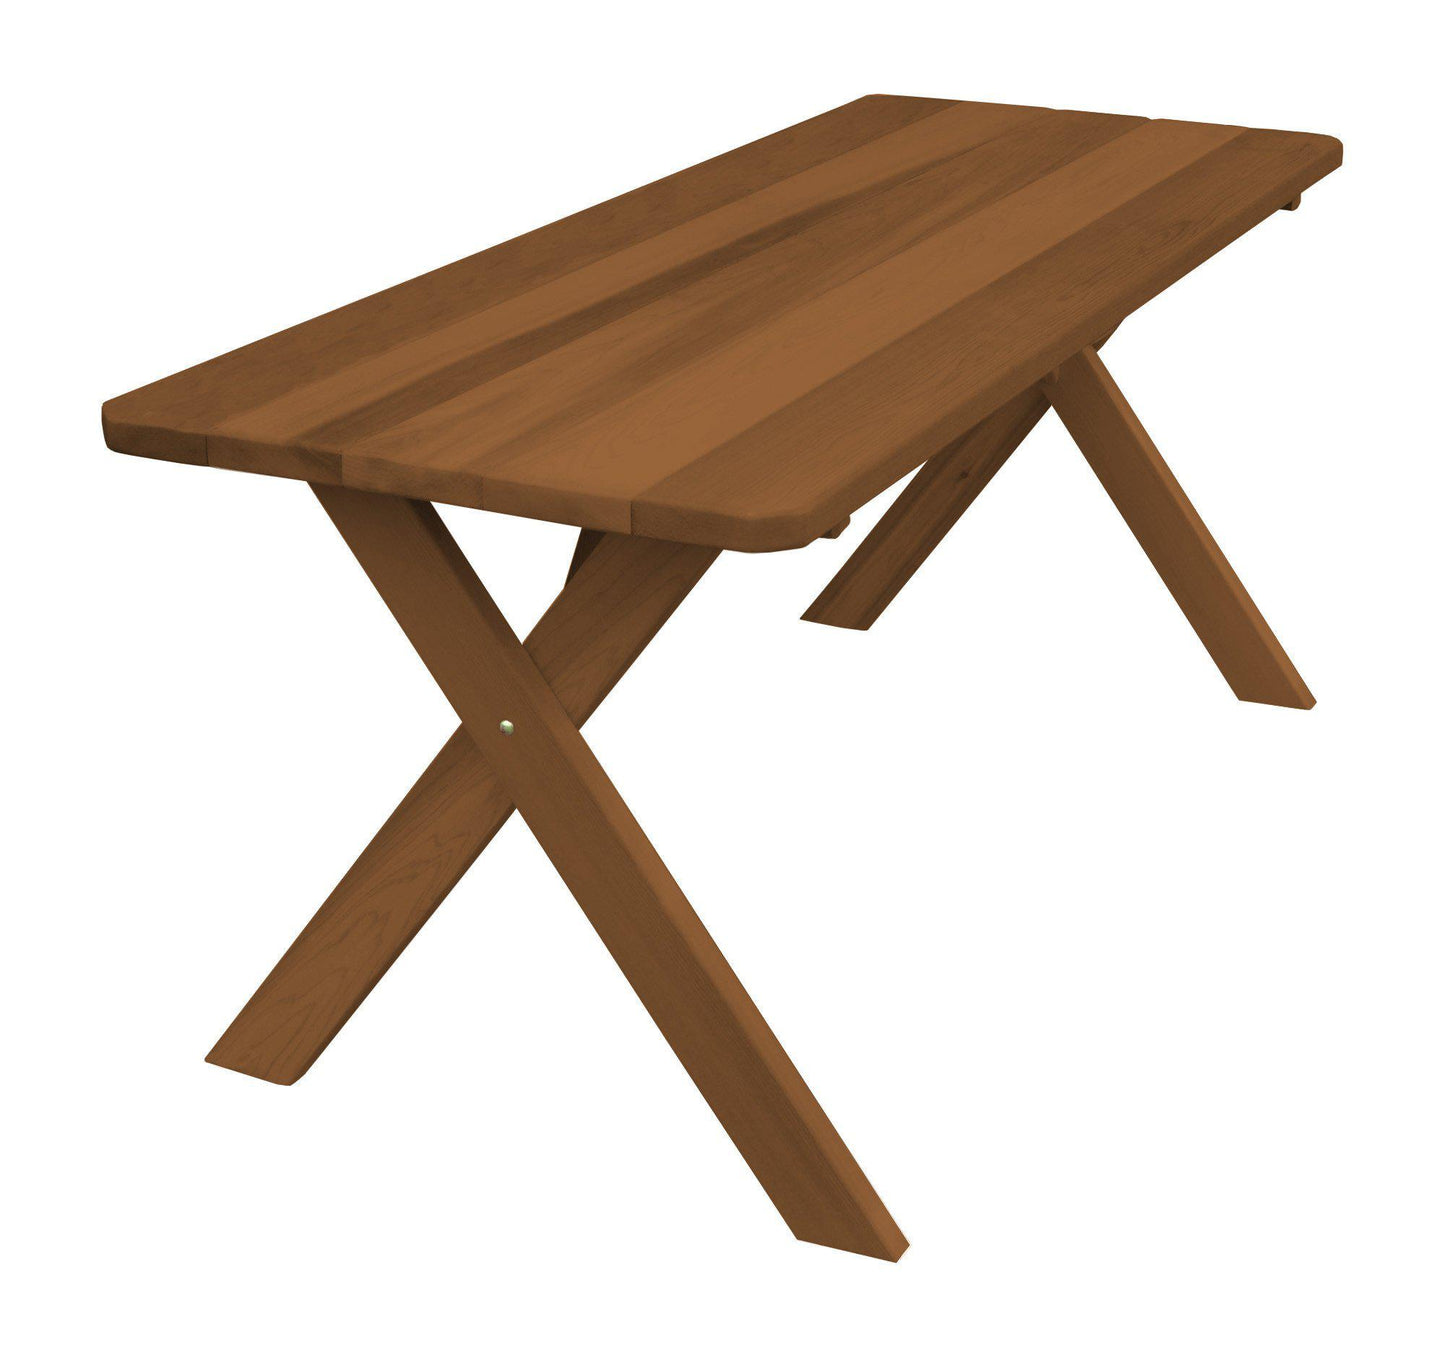 A&L FURNITURE CO.Western Red Cedar 94" Cross-leg Table Only - Specify for FREE 2" Umbrella Hole - LEAD TIME TO SHIP 4 WEEKS OR LESS